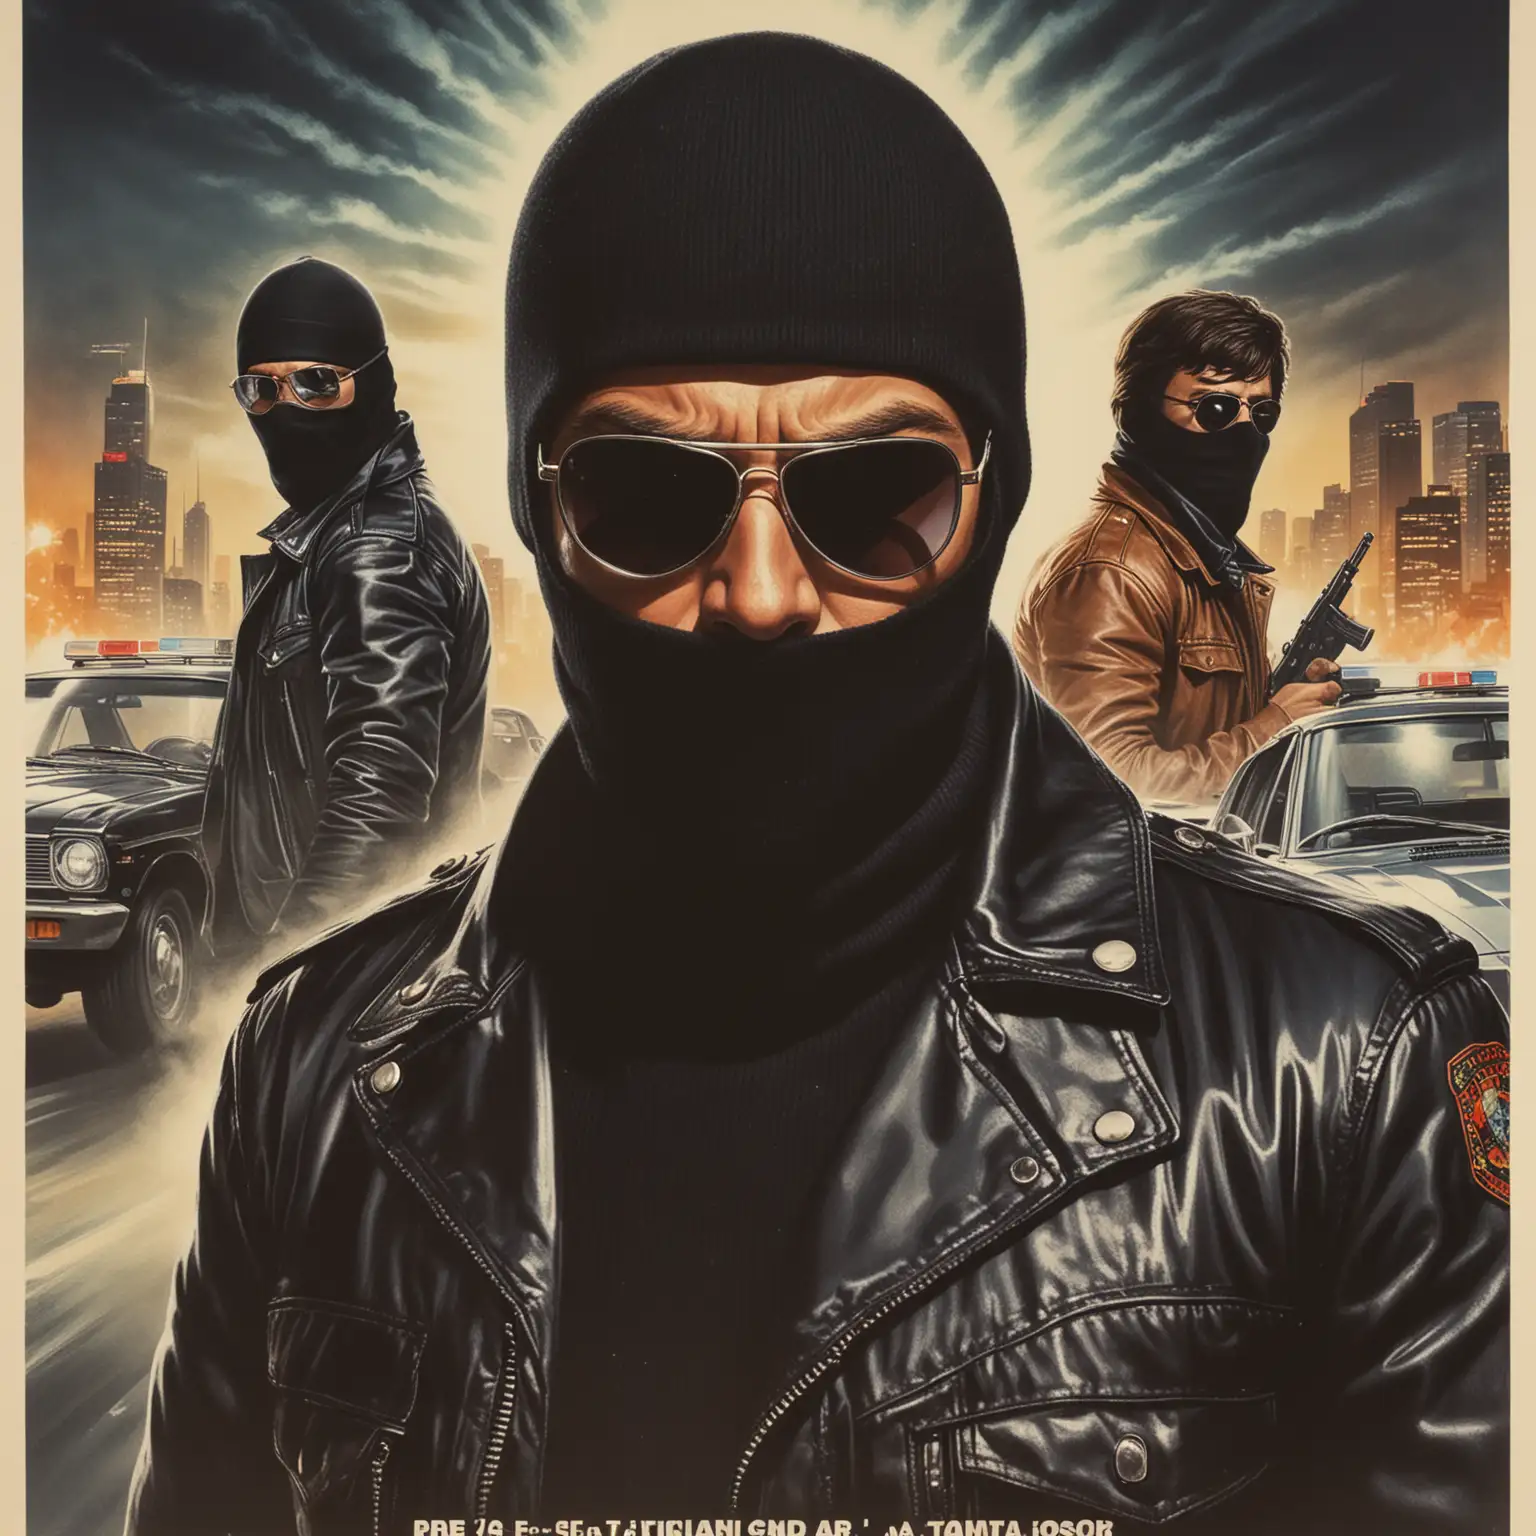 private cop with balaclava and criminals , car chase, angry face, sunglasses and leather jacket 70s movie poster, super panavision 70, city at night
